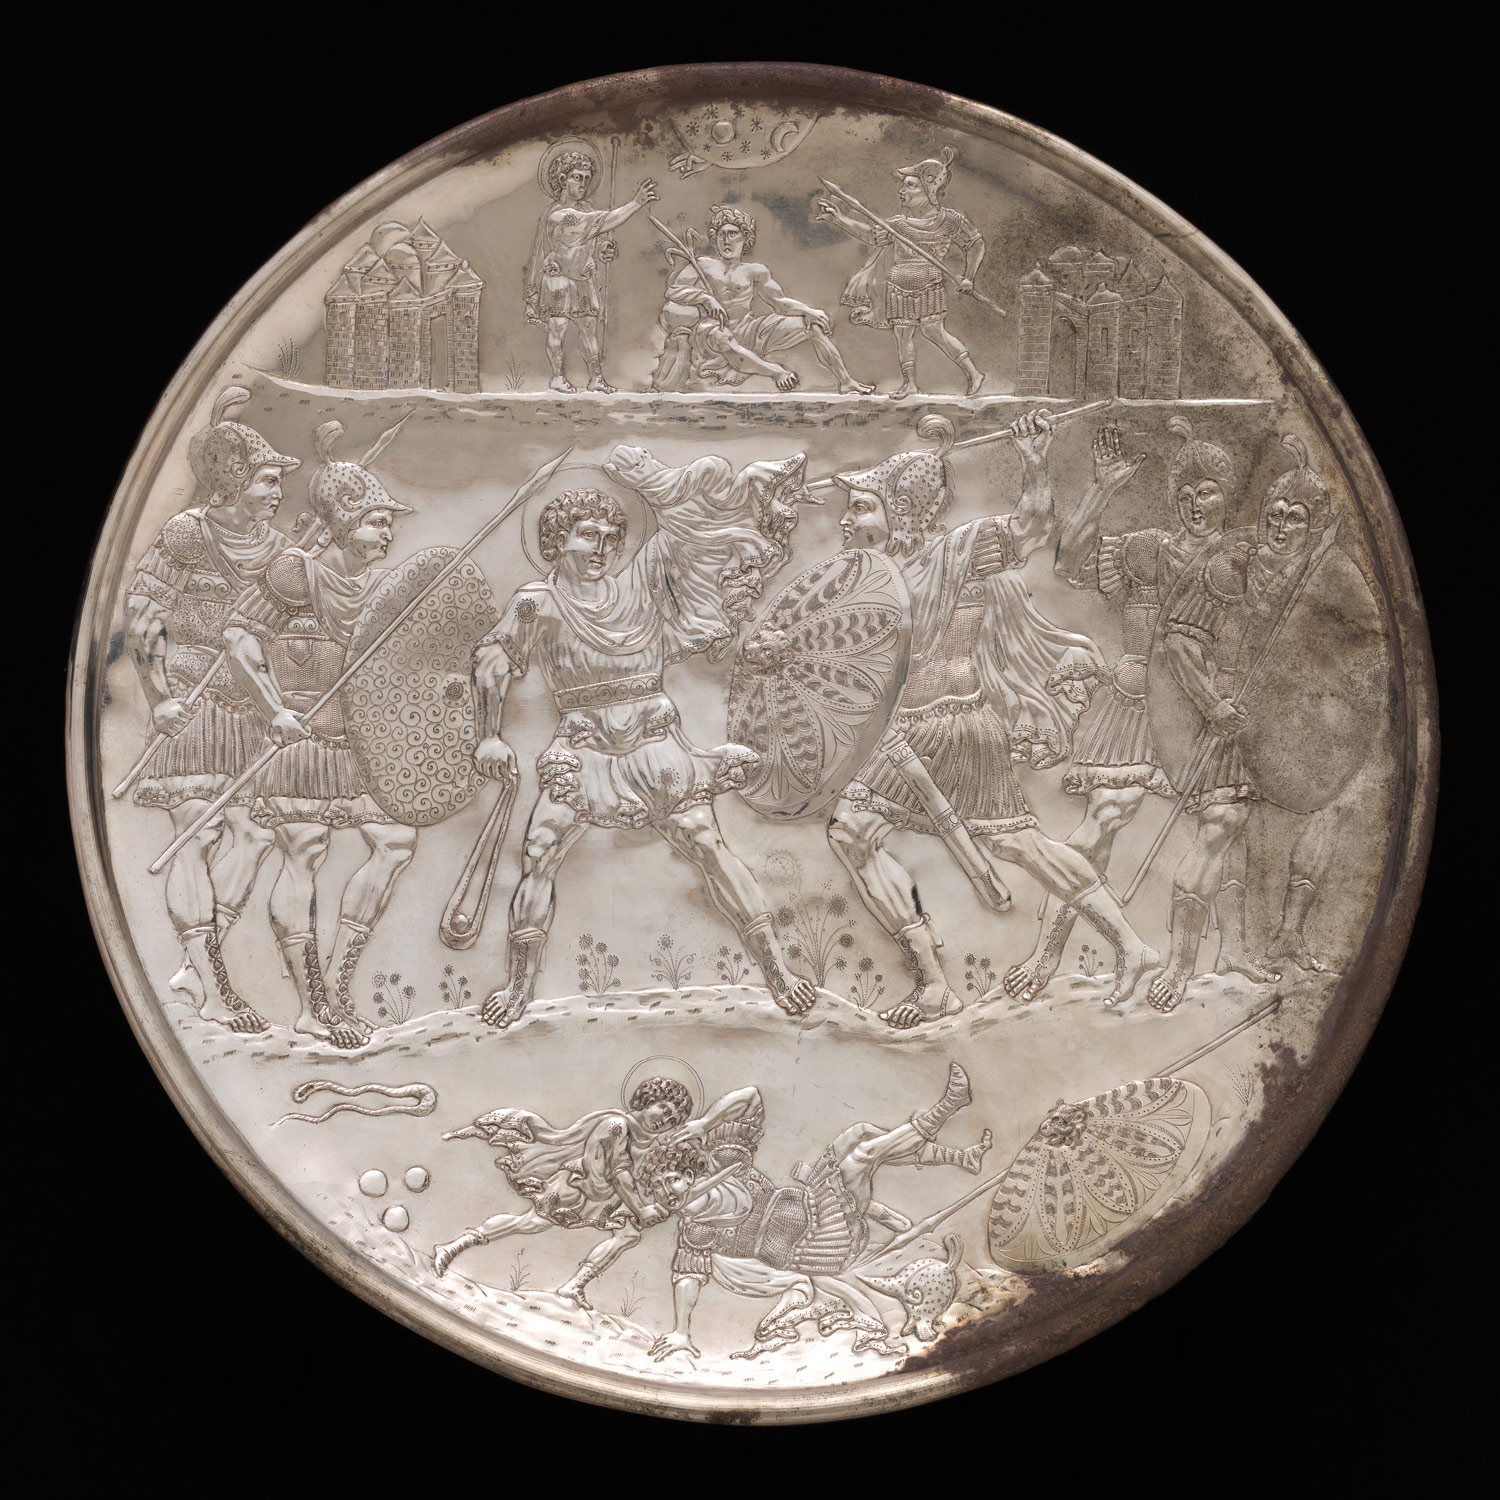 Plate with the Battle of David and Goliath